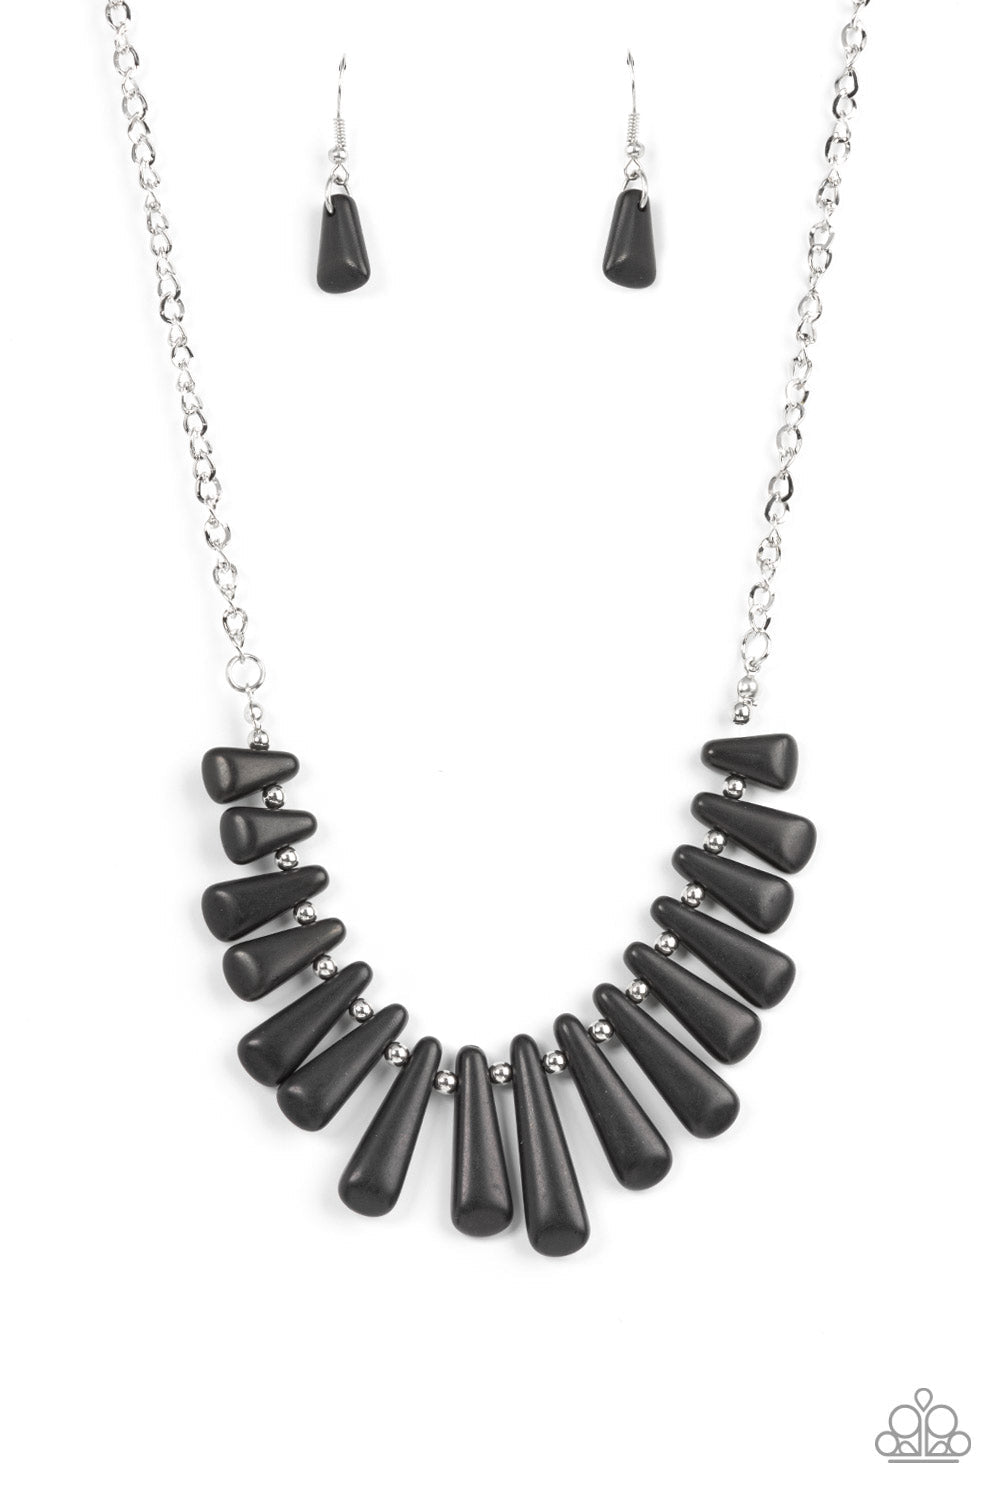 Mojave Empress - Black Triangular Stones/Dainty Silver Beaded Paparazzi Necklace & matching earrings